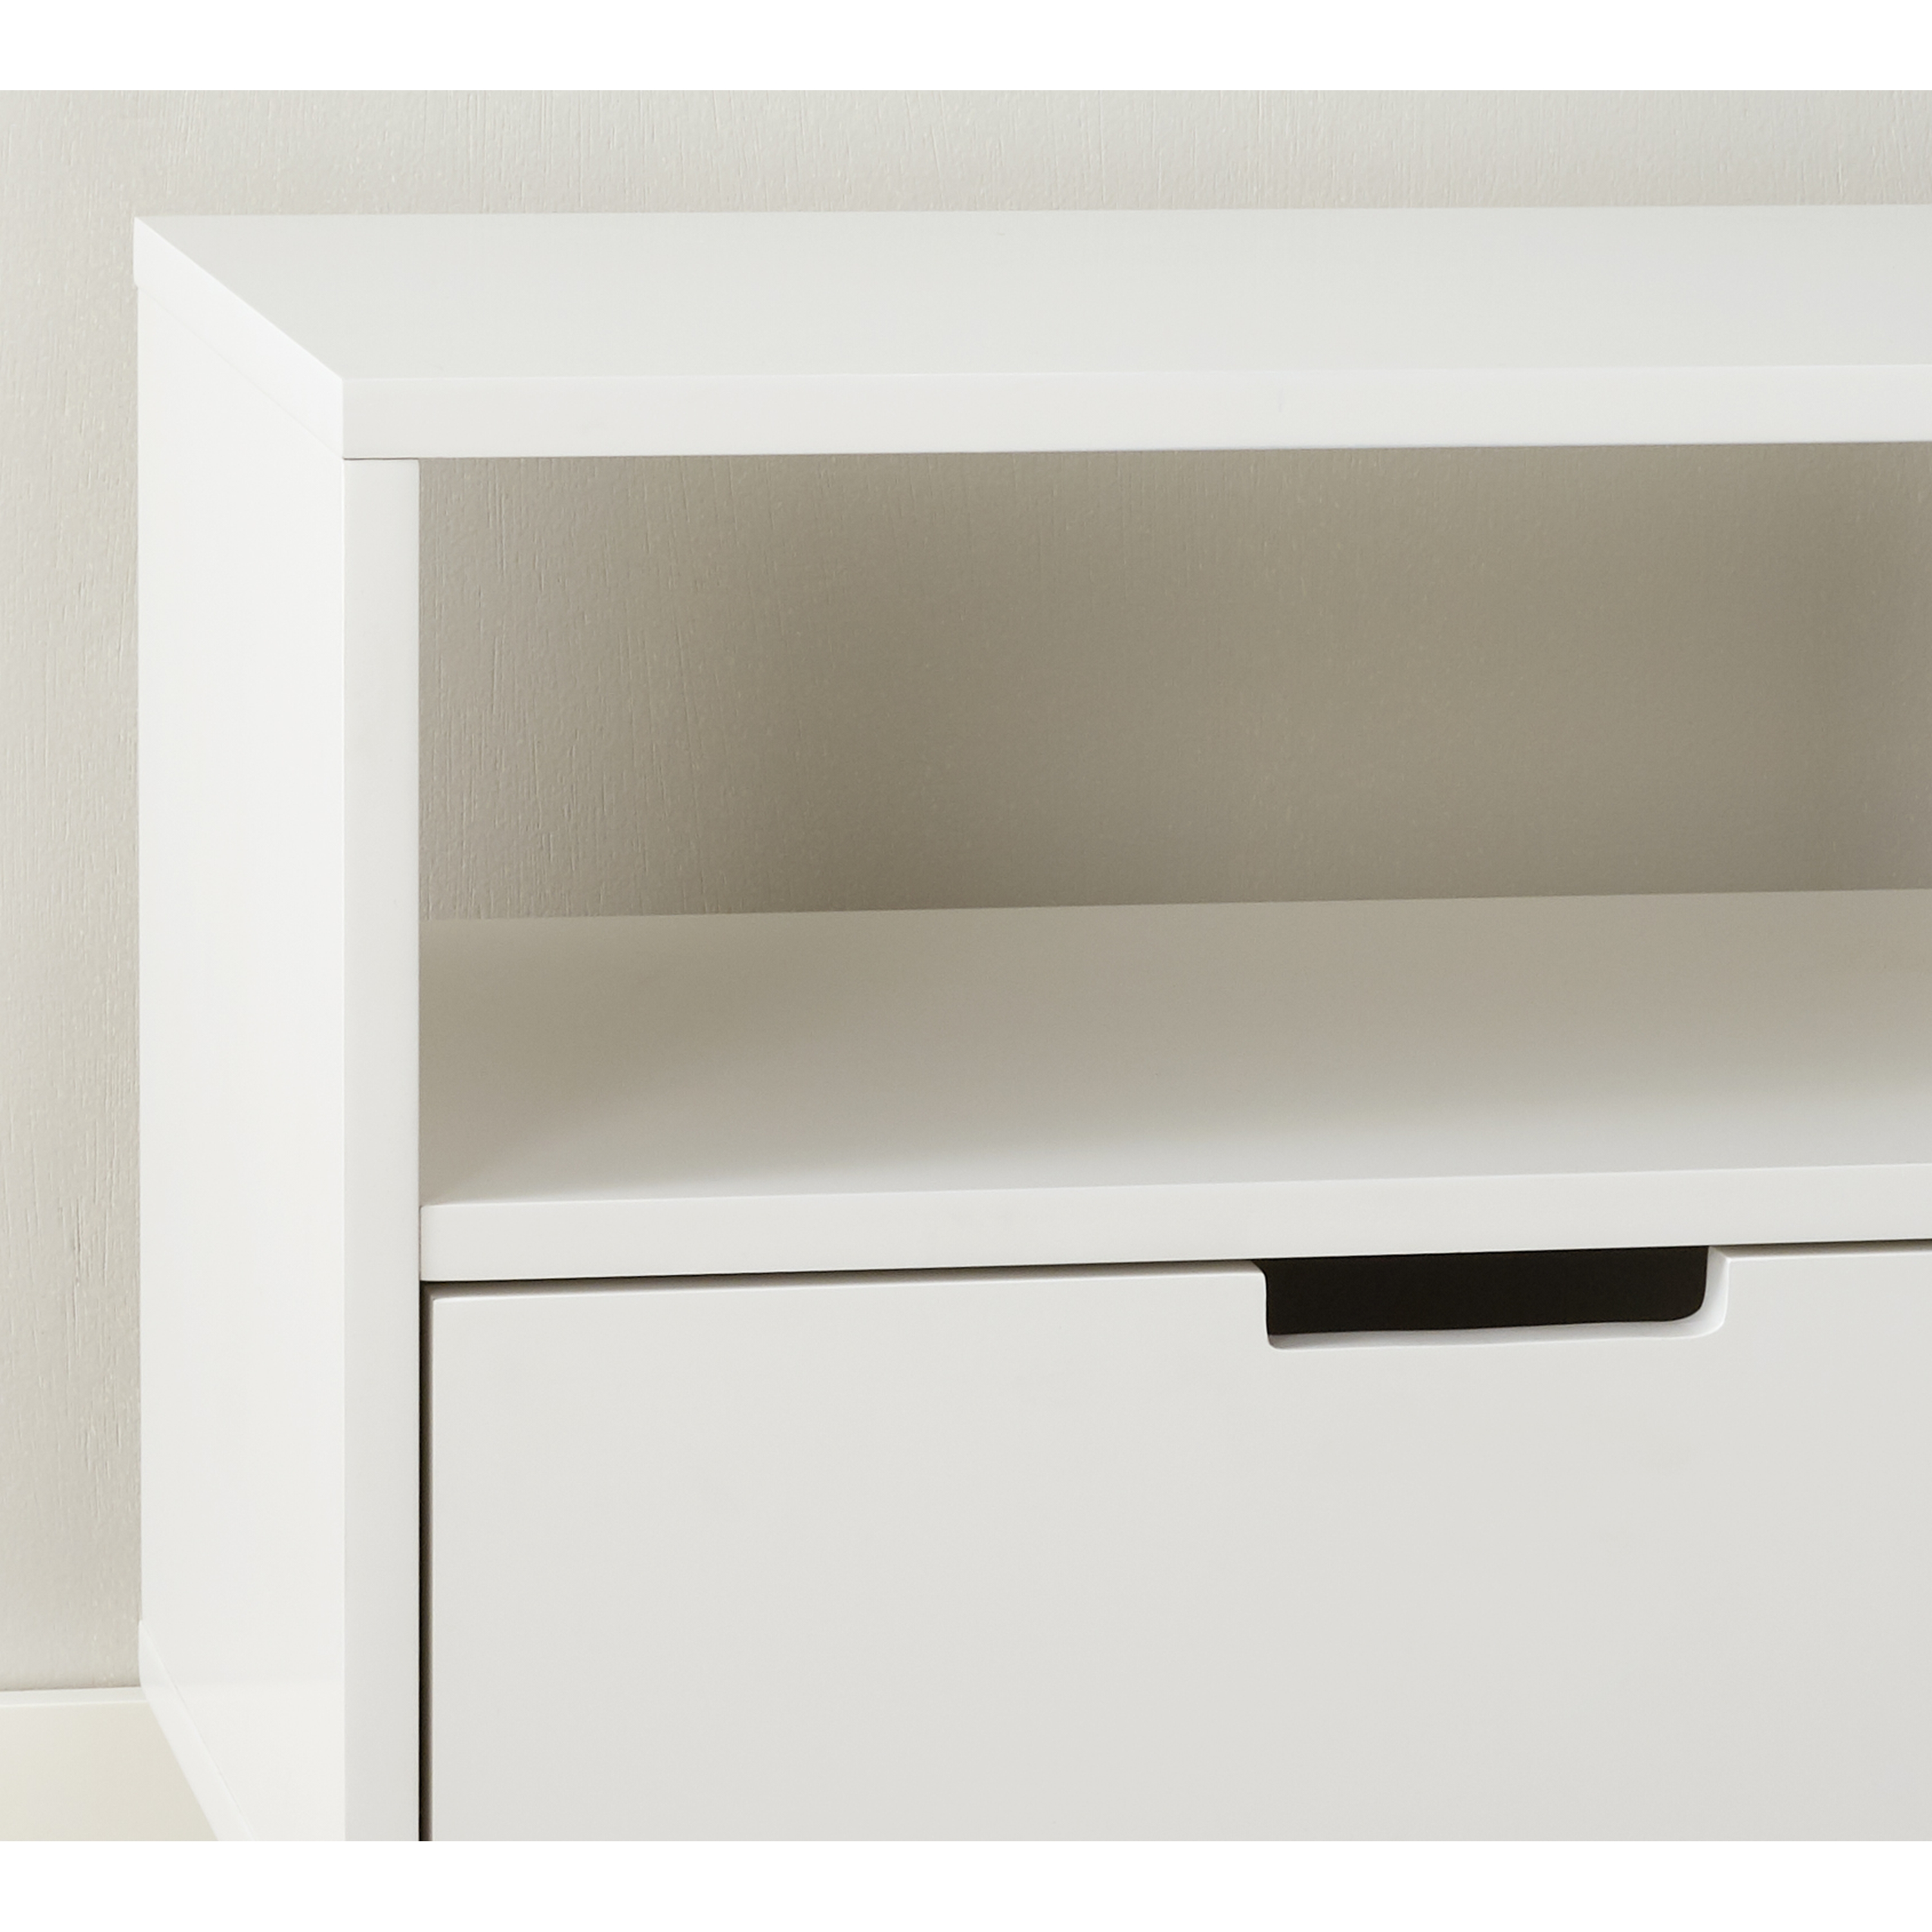 Better Homes & Gardens Flynn TV Stand for TVs Up to 55", White - image 2 of 2